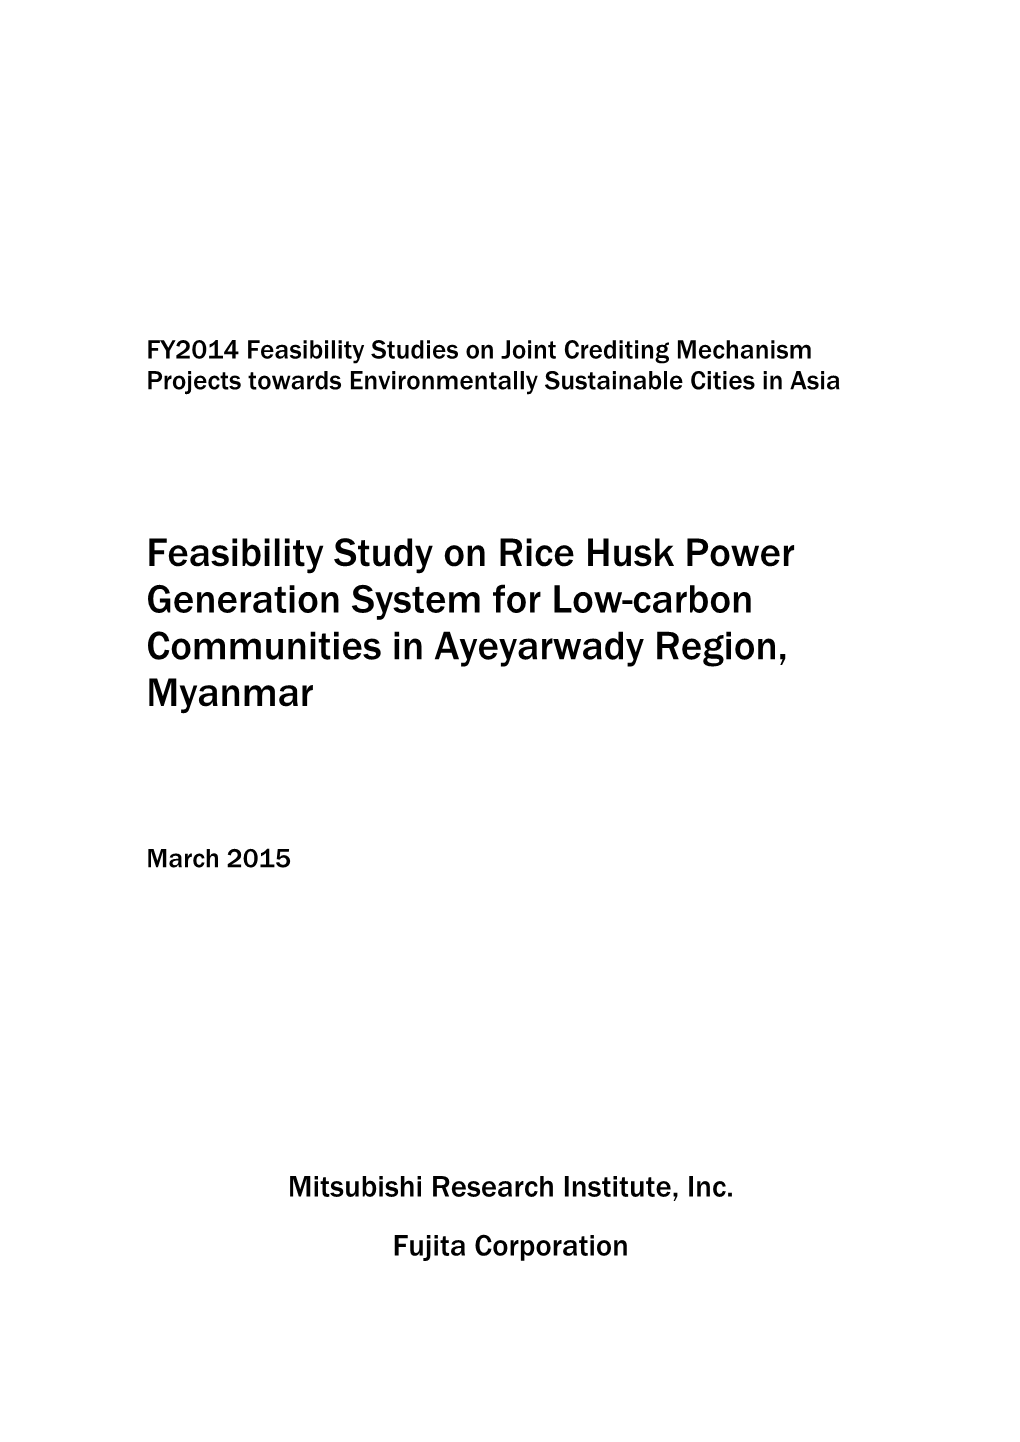 Feasibility Study on Rice Husk Power Generation System for Low-Carbon Communities in Ayeyarwady Region, Myanmar